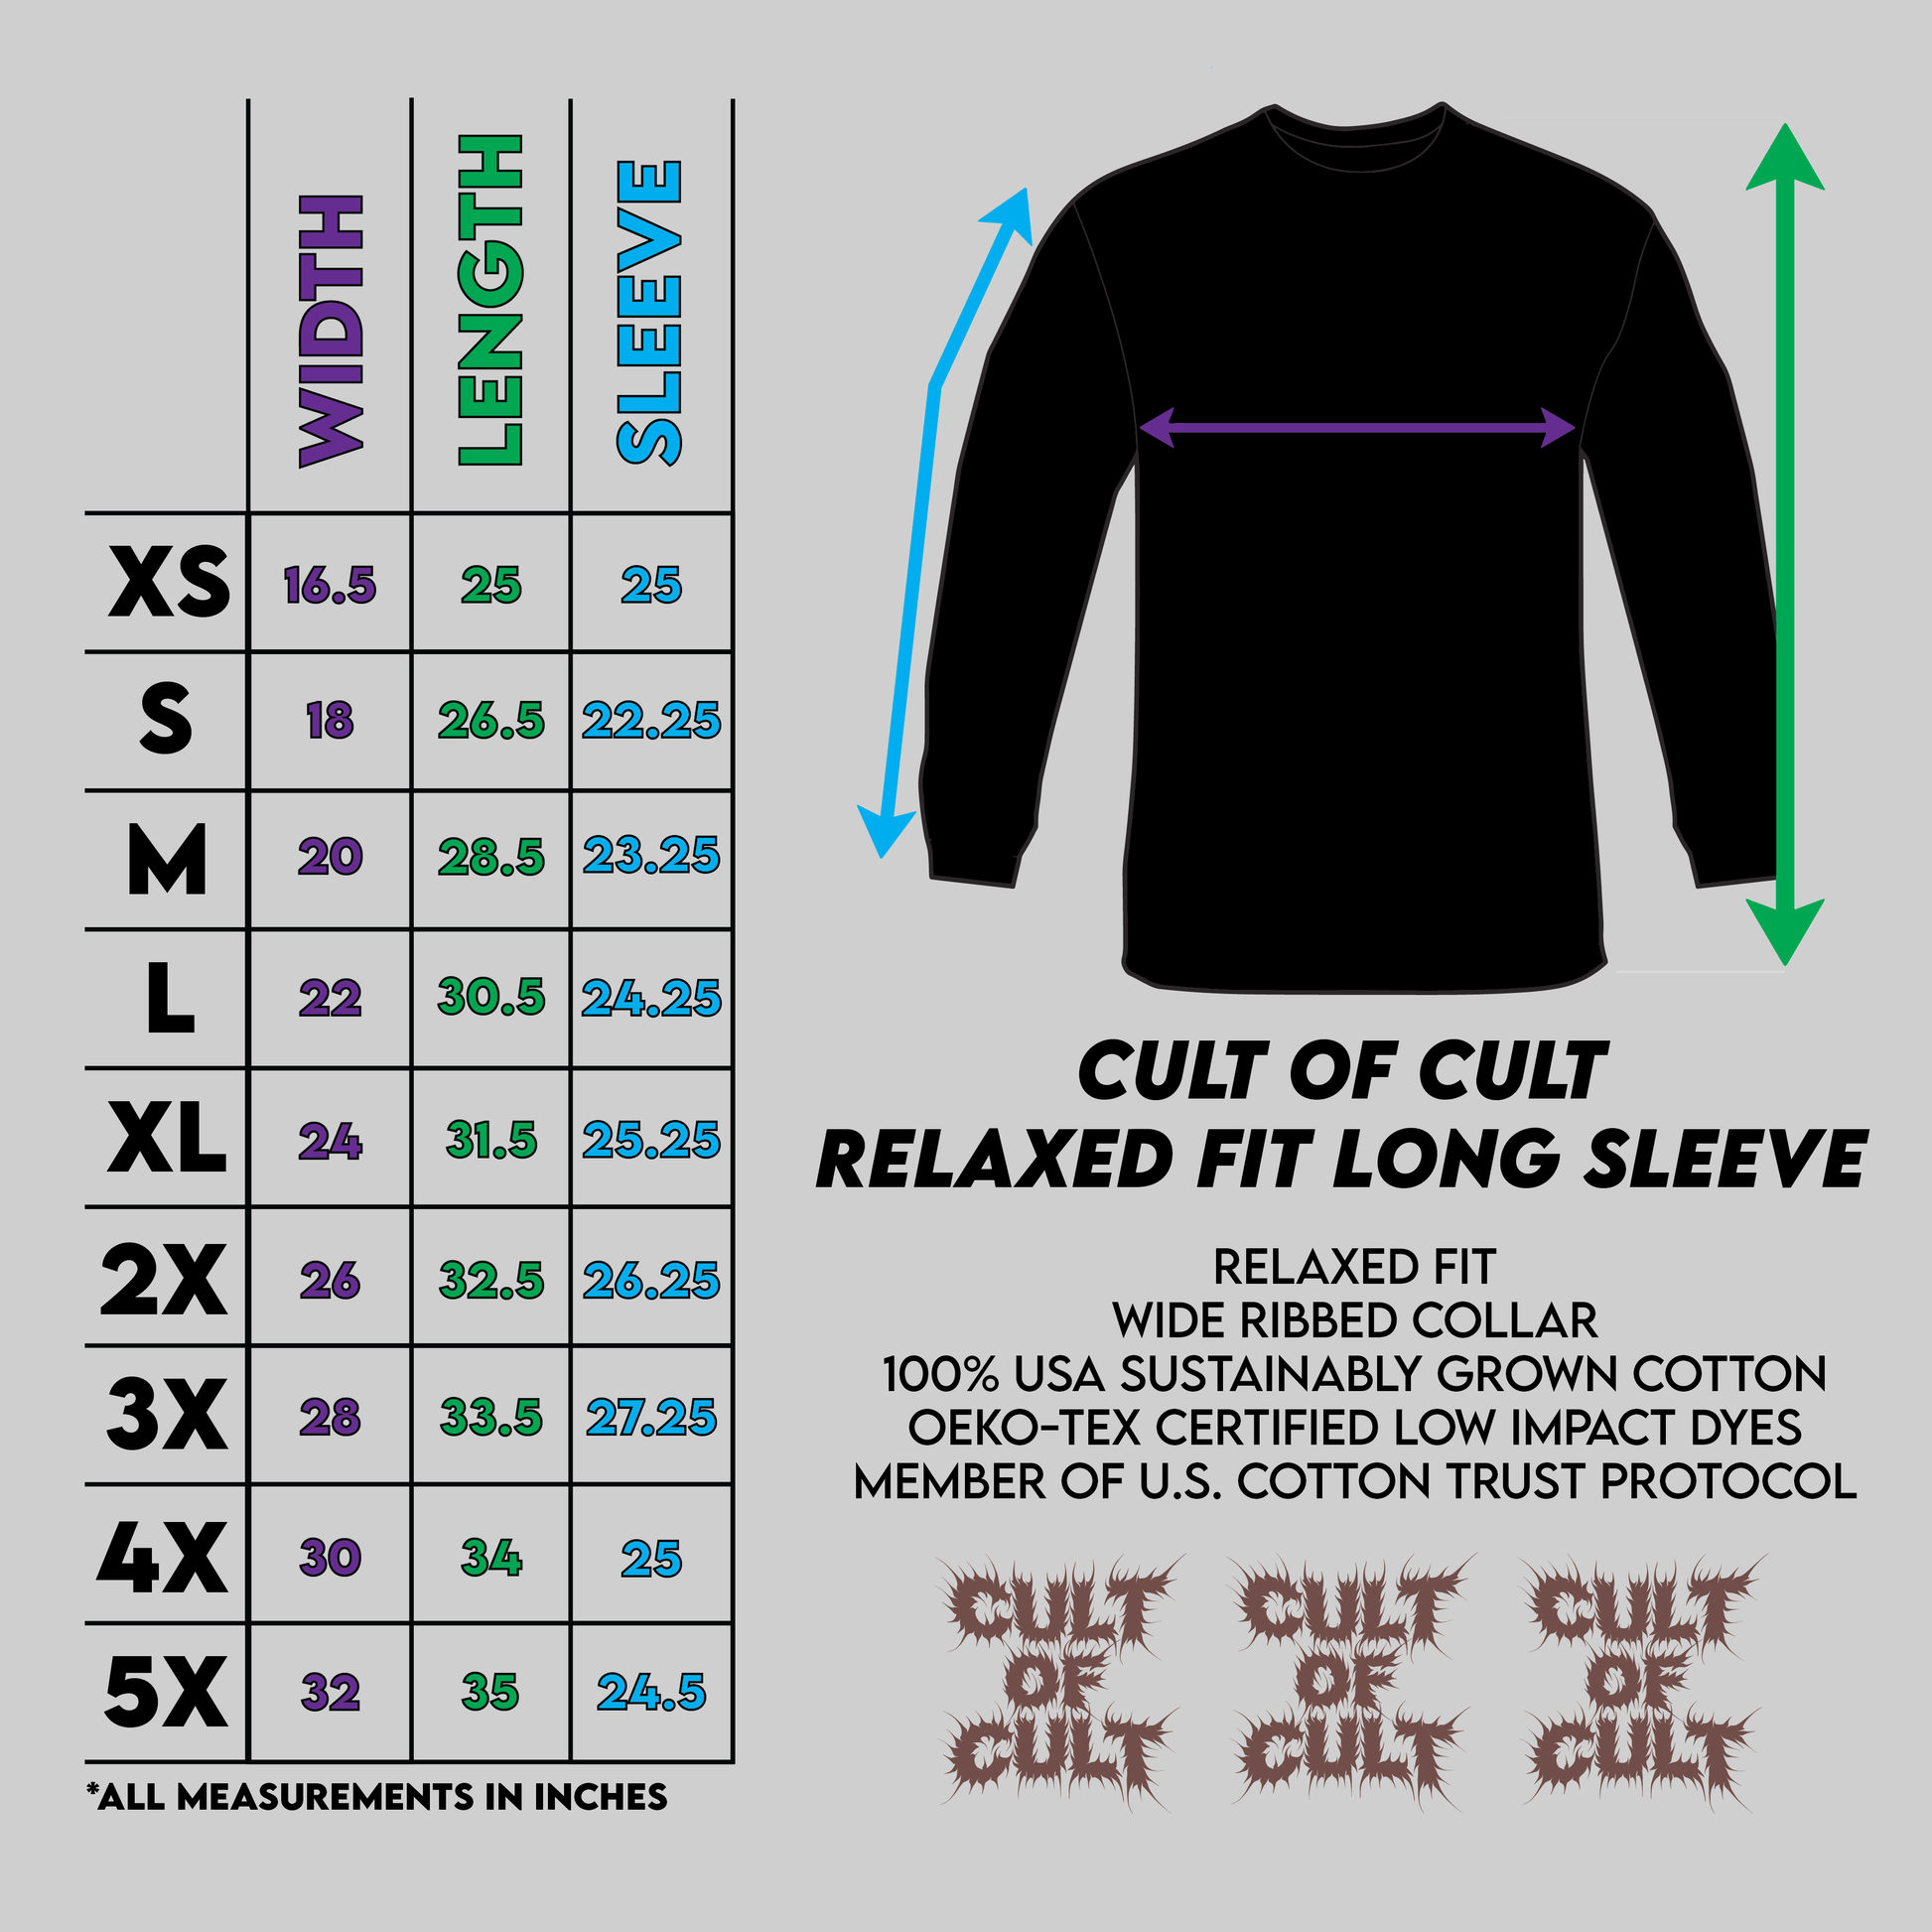 Cult of Cult long sleeve sizing chart